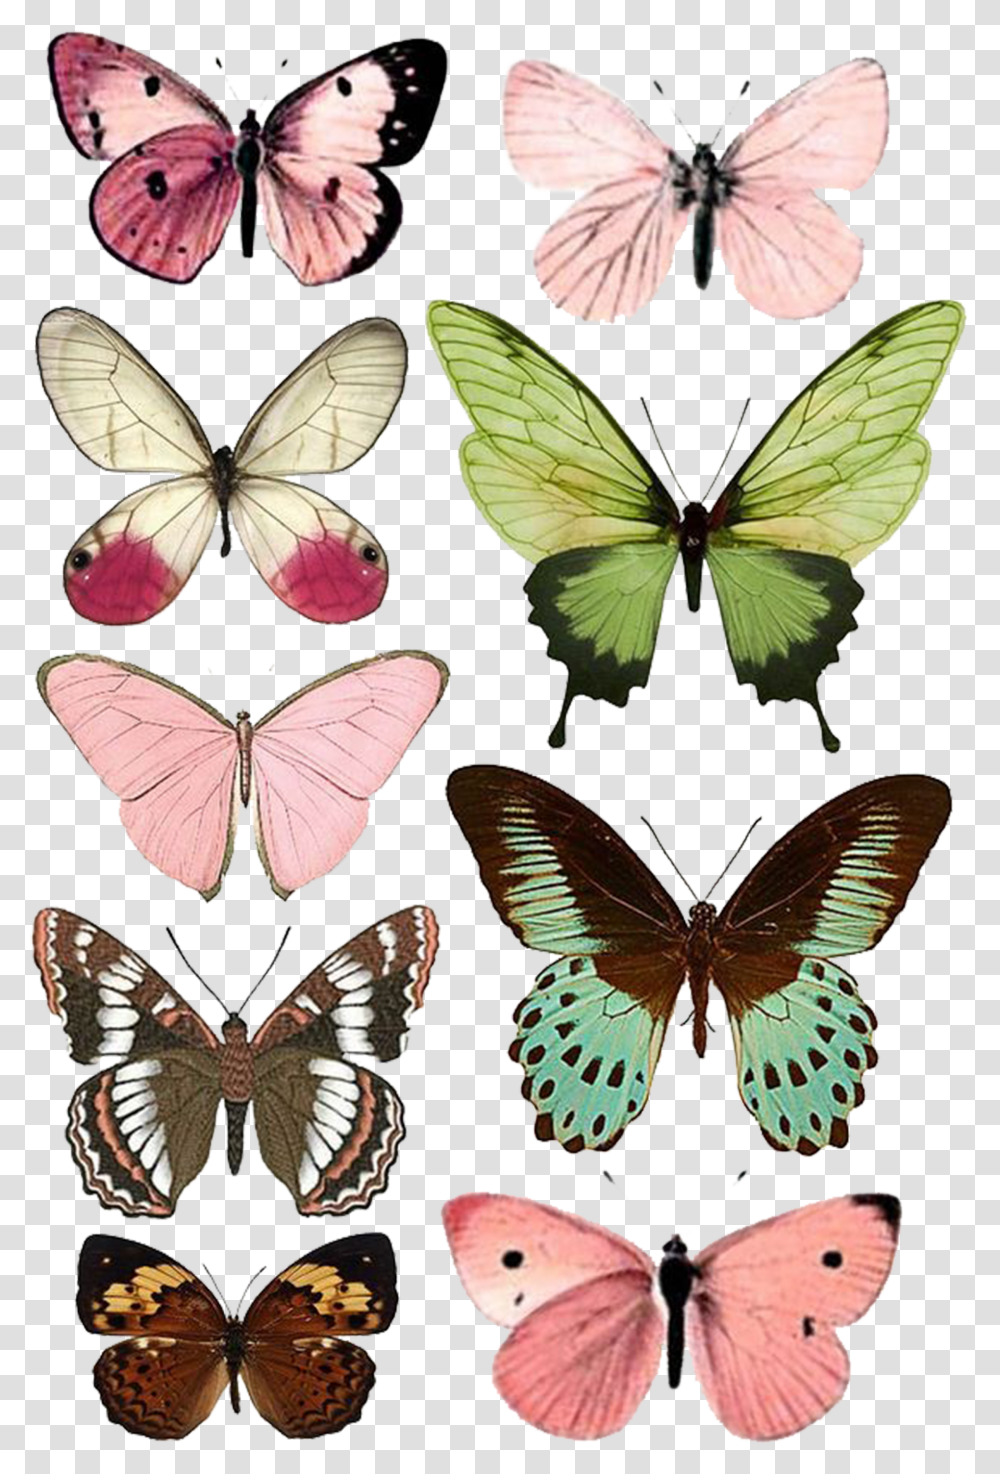 Butterfly Moth Insect Paper Printing Free Download Butterflies To Print Transparent Png